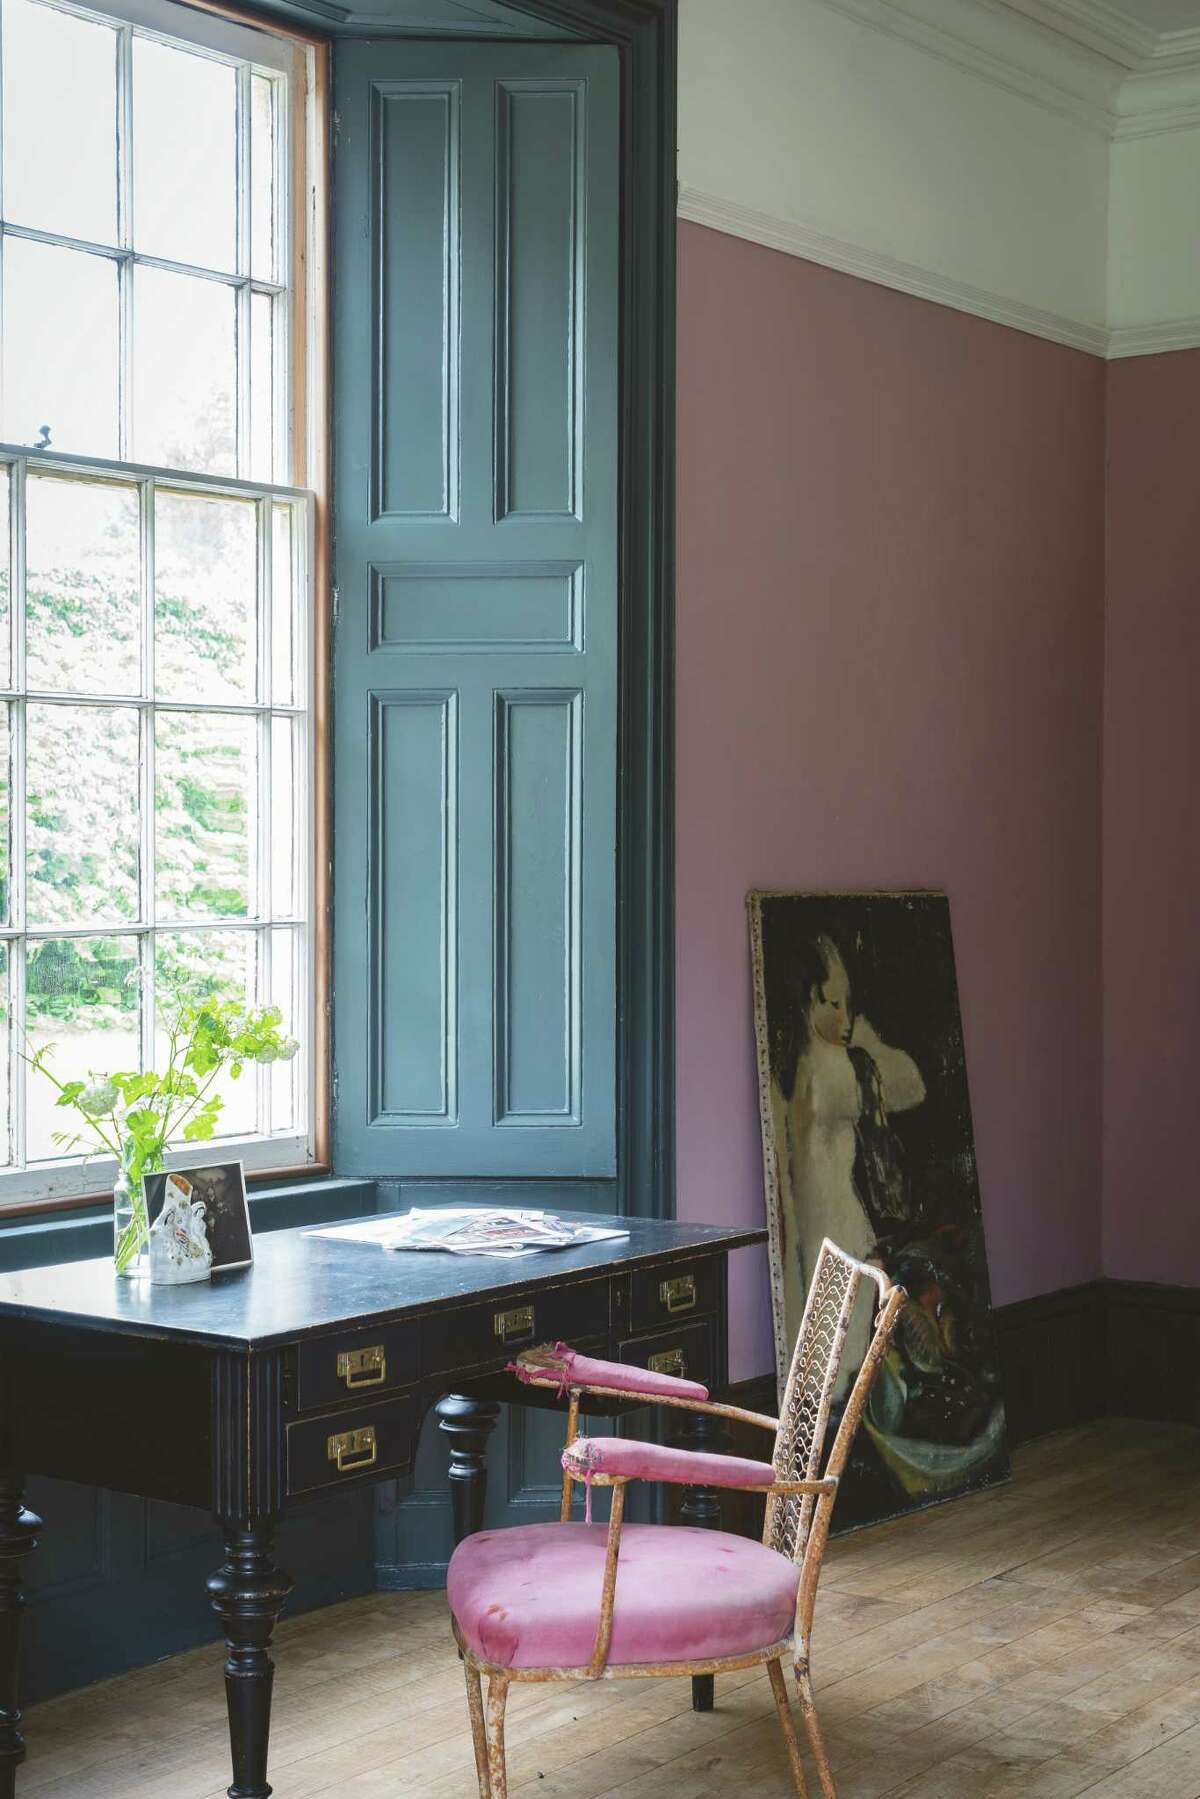 Glossy paint was used on the woodwork and flat paint was used on the walls. Full-gloss paint bounces light off of the shutters and feels traditional.